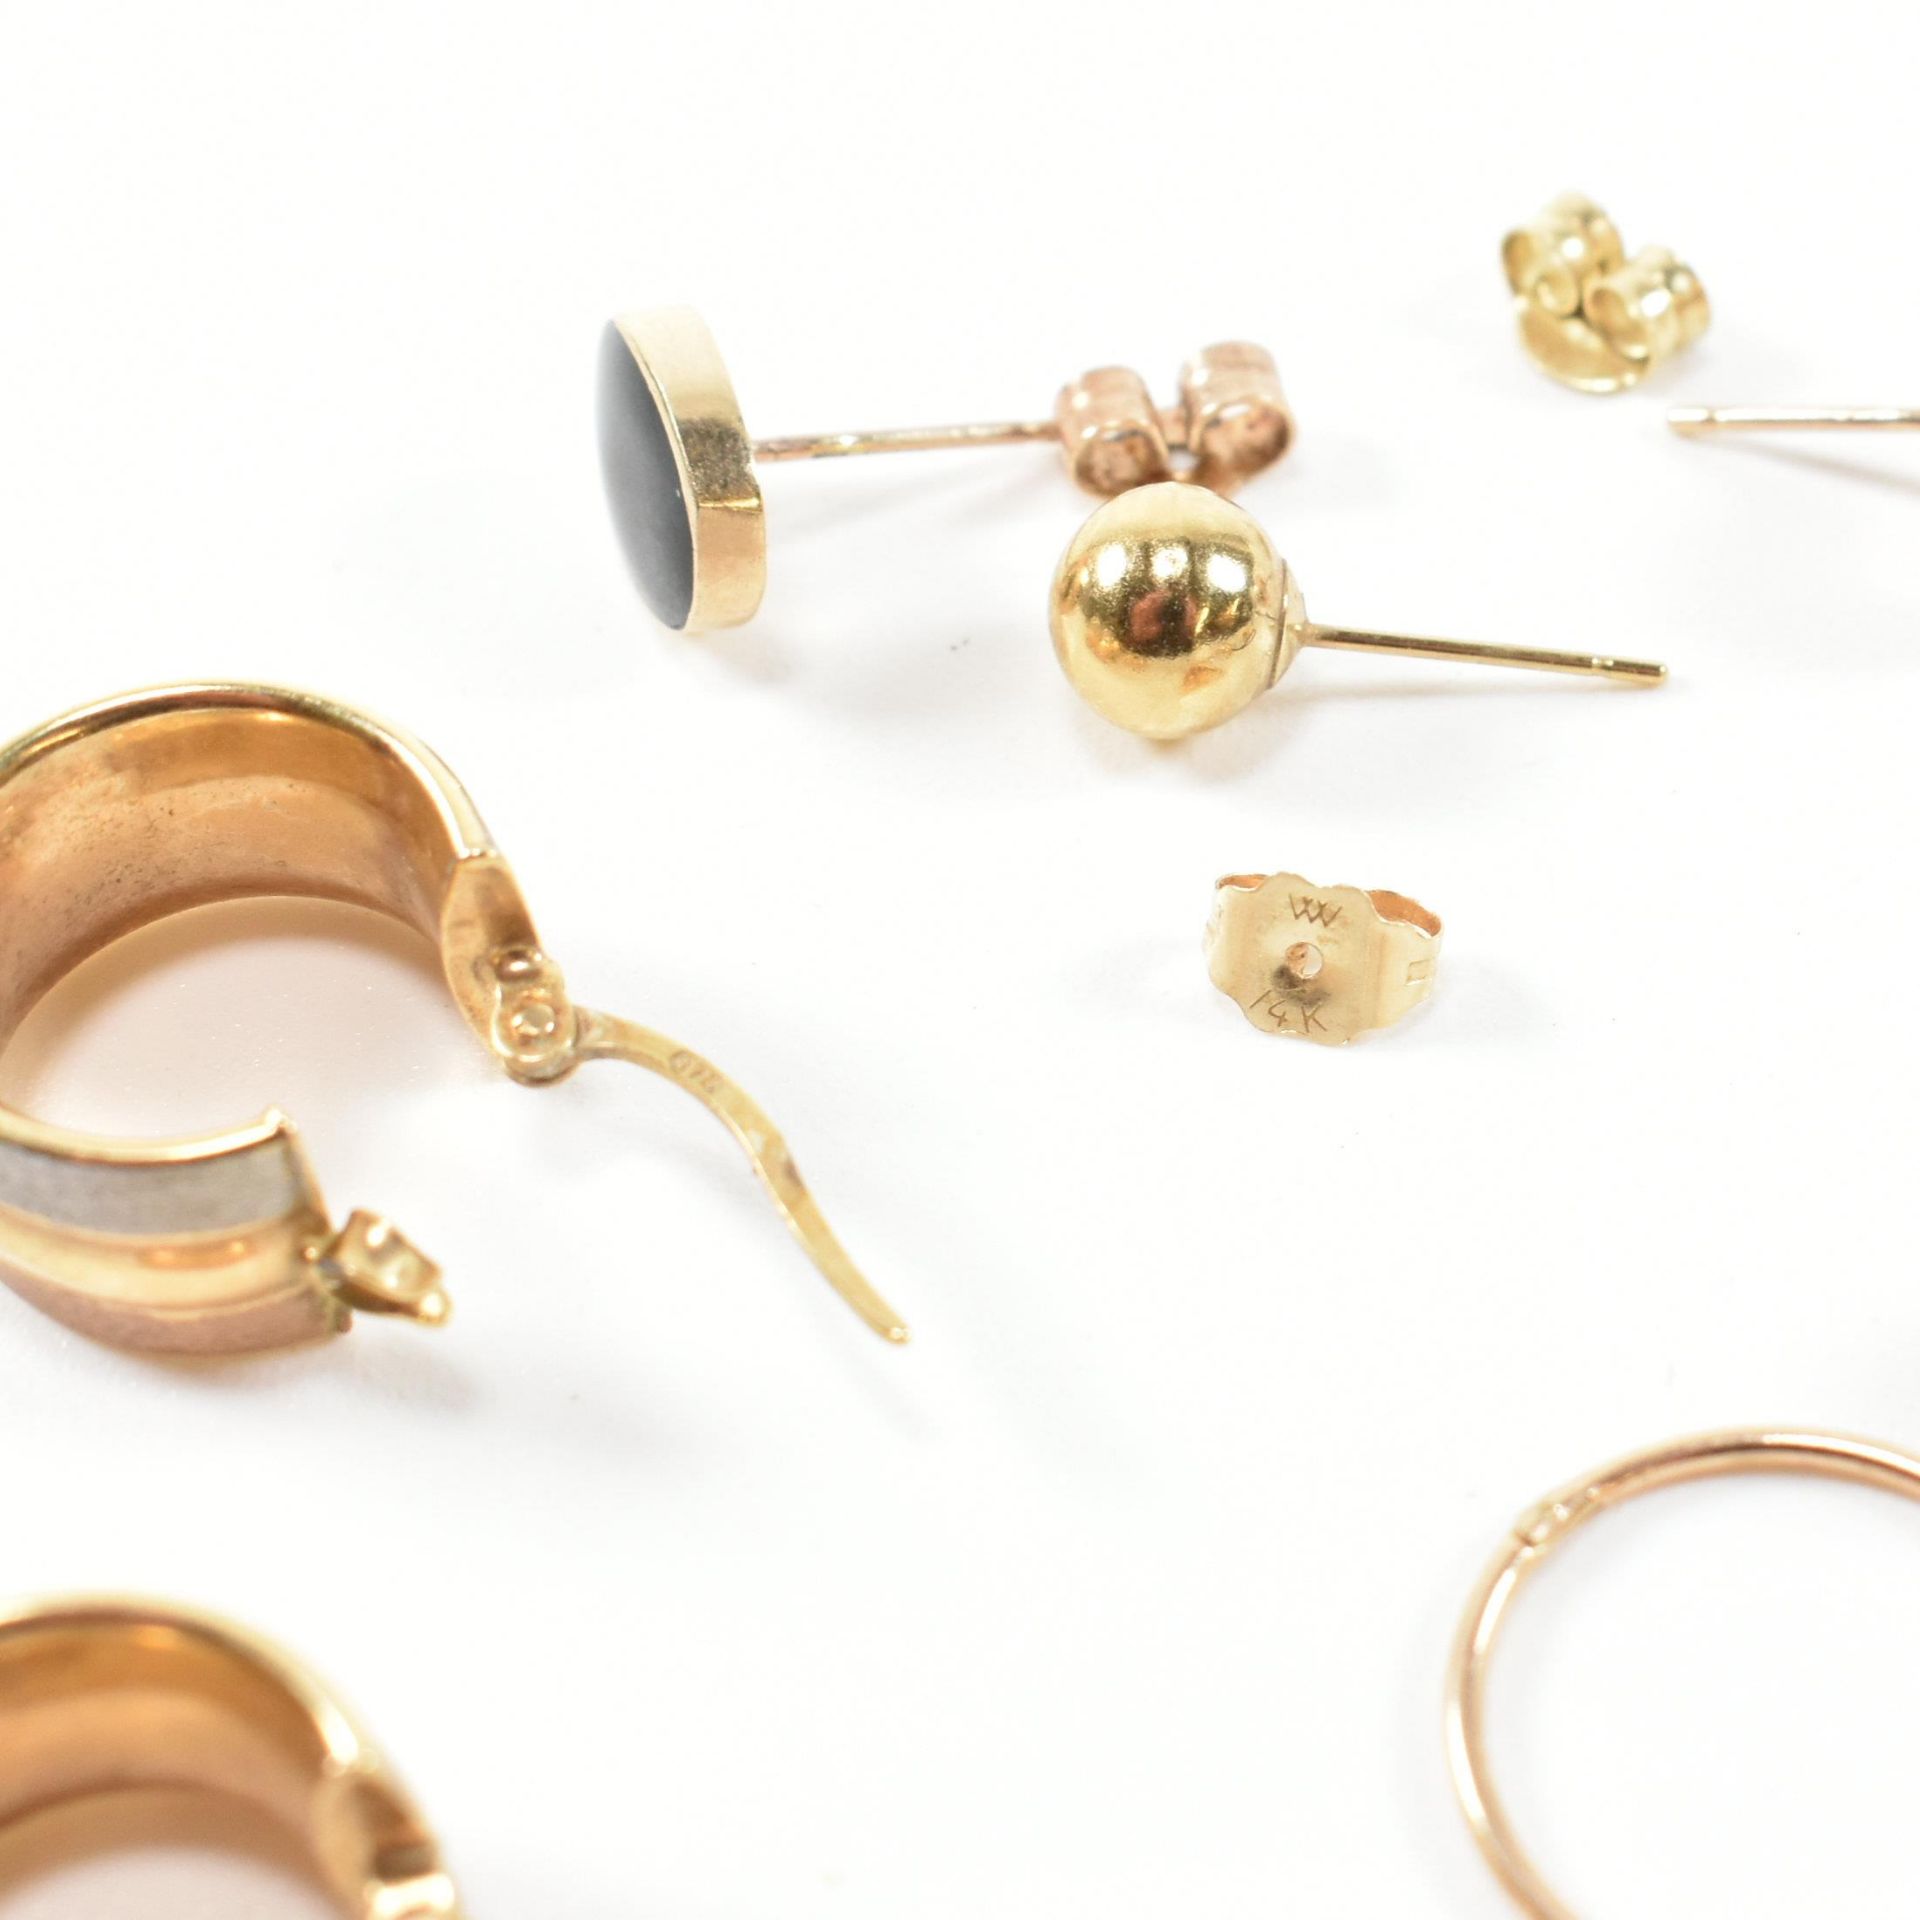 COLLECTION OF 9CT GOLD HOOP & STUD EARRINGS - Image 6 of 7